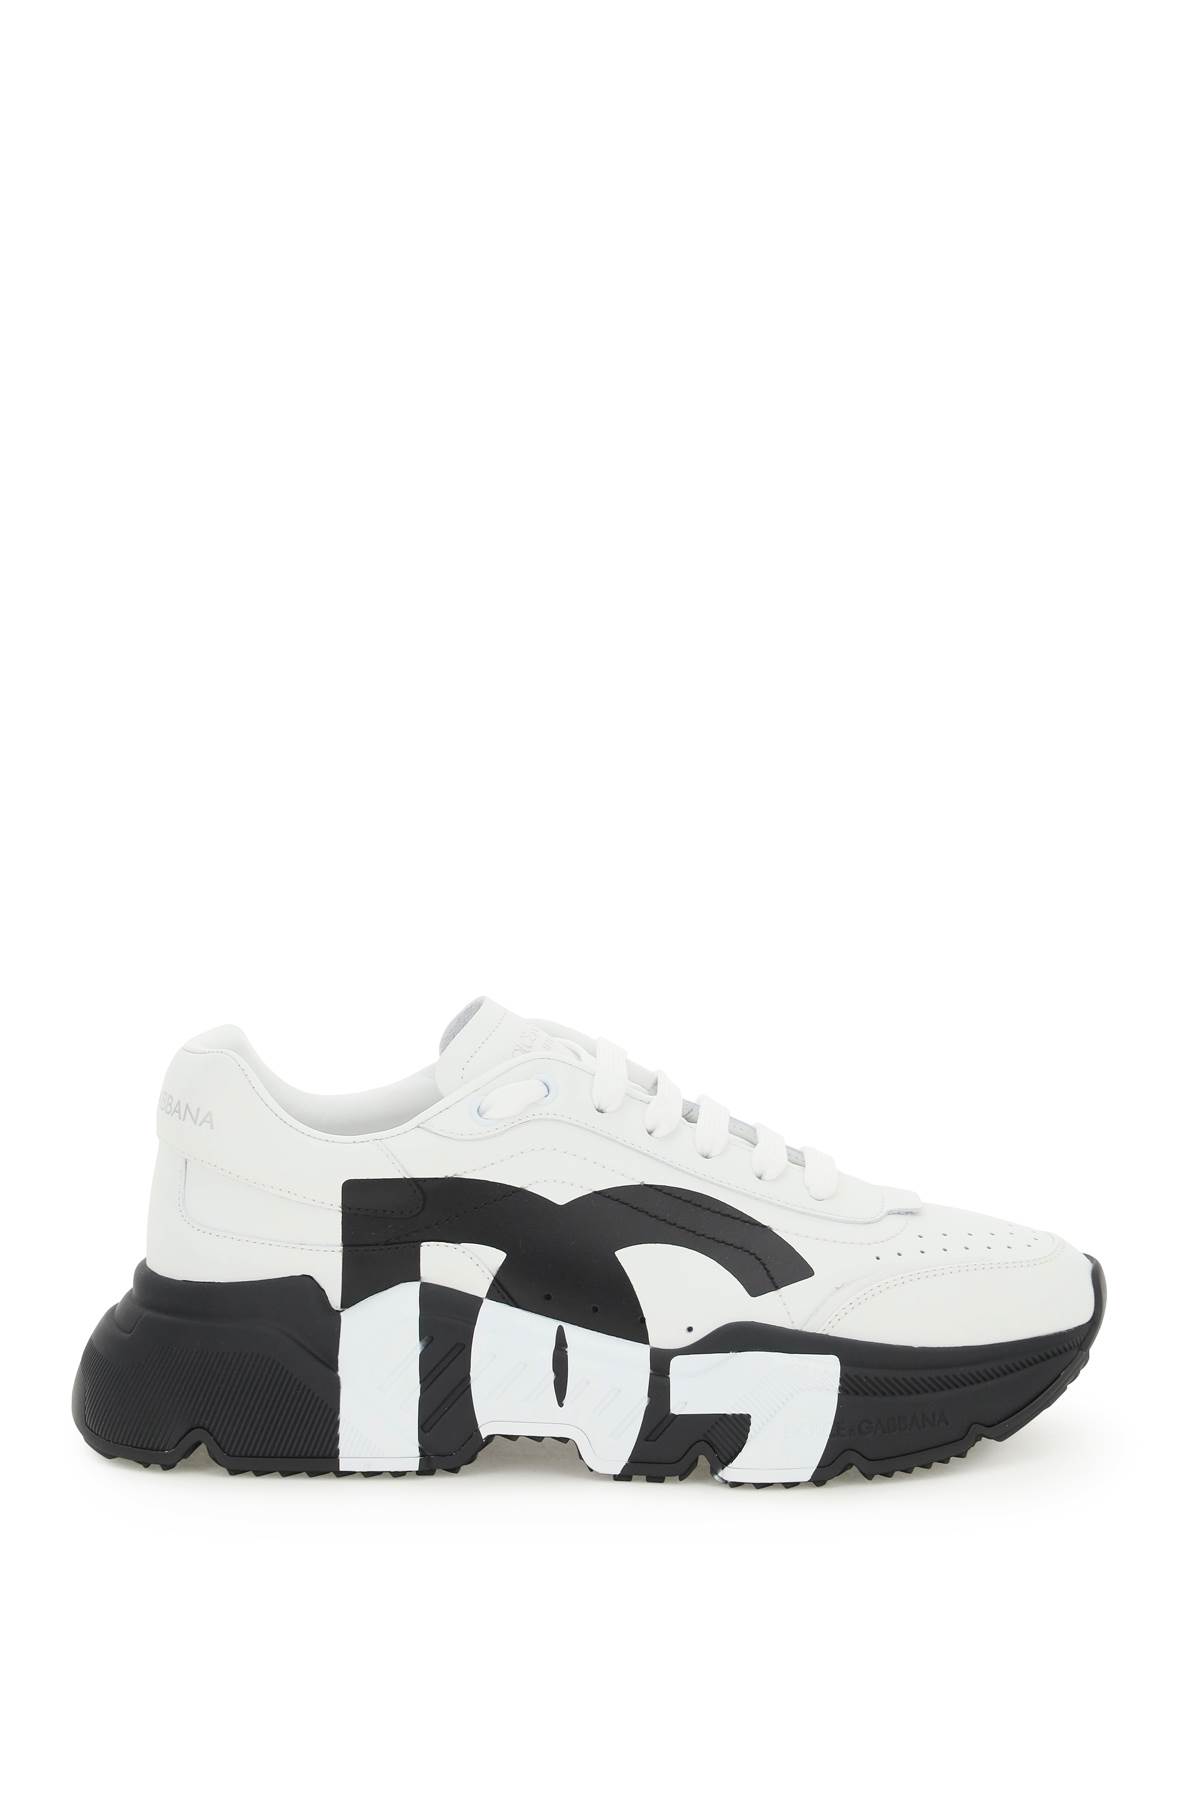 Dolce & Gabbana Leather Daymaster Sneakers